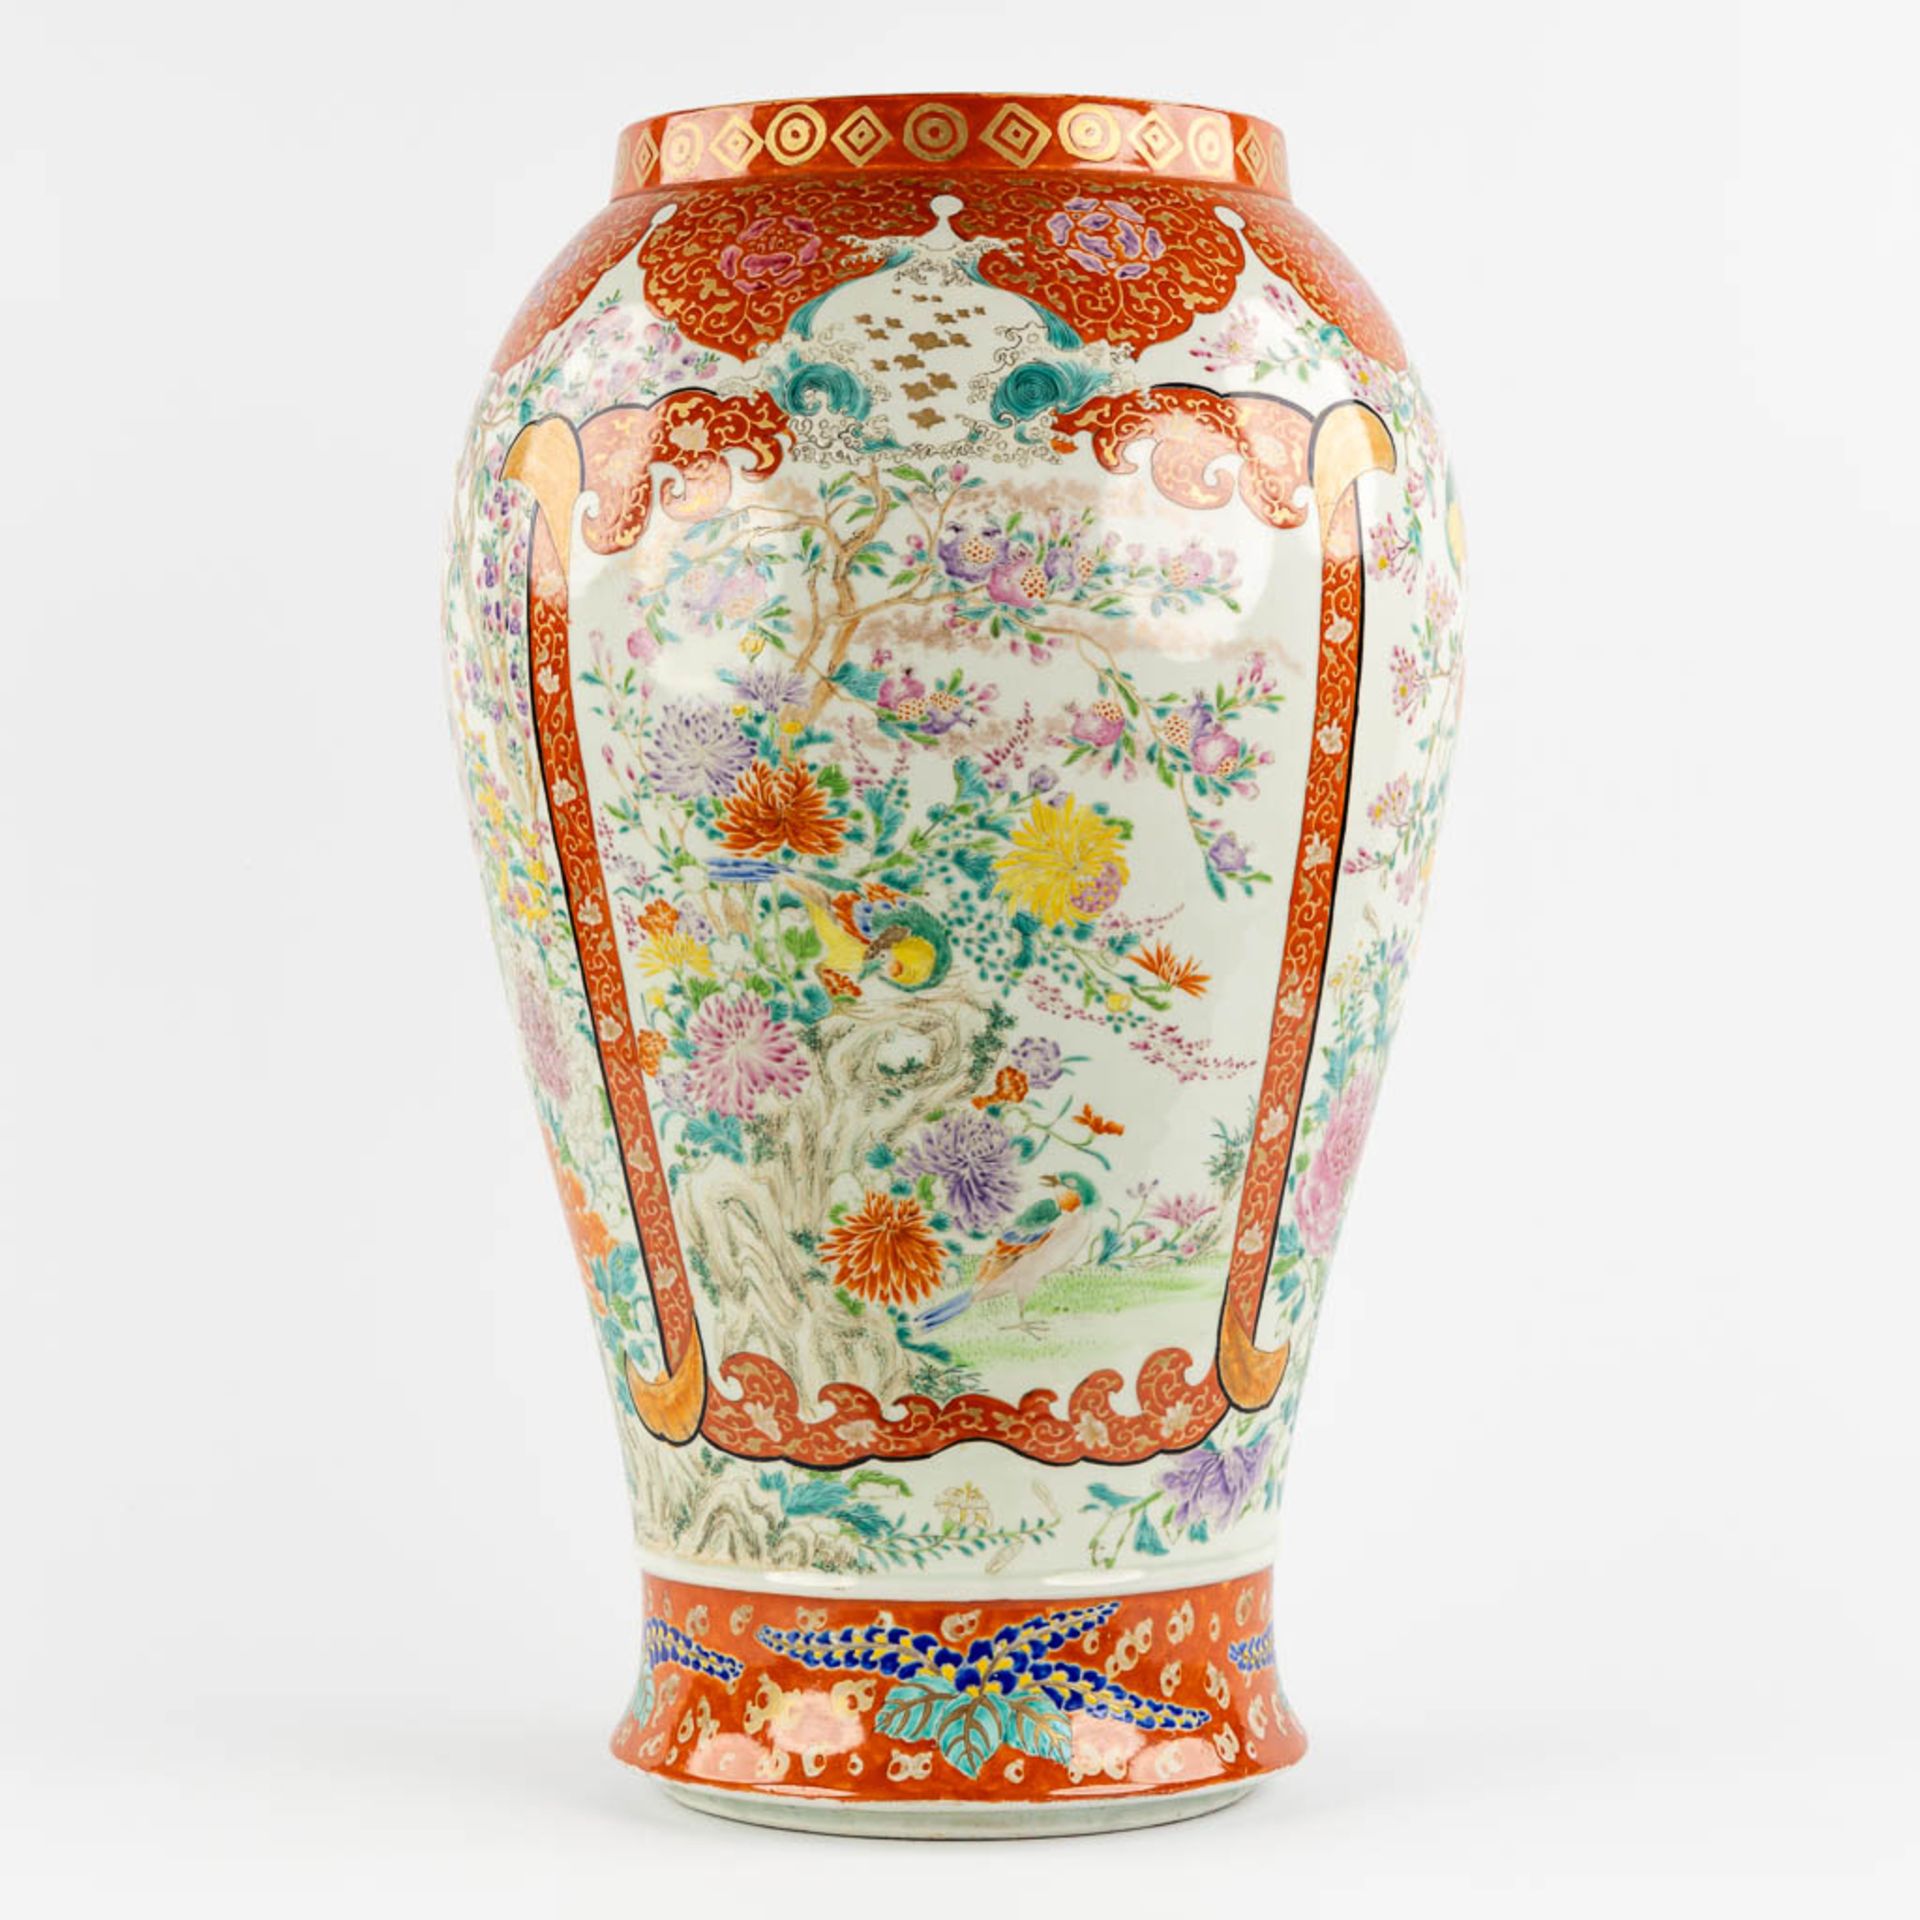 A large Japanese Kutani vase, decorated with fauna and flora. 19th C. (H:61 x D:38 cm) - Image 4 of 13